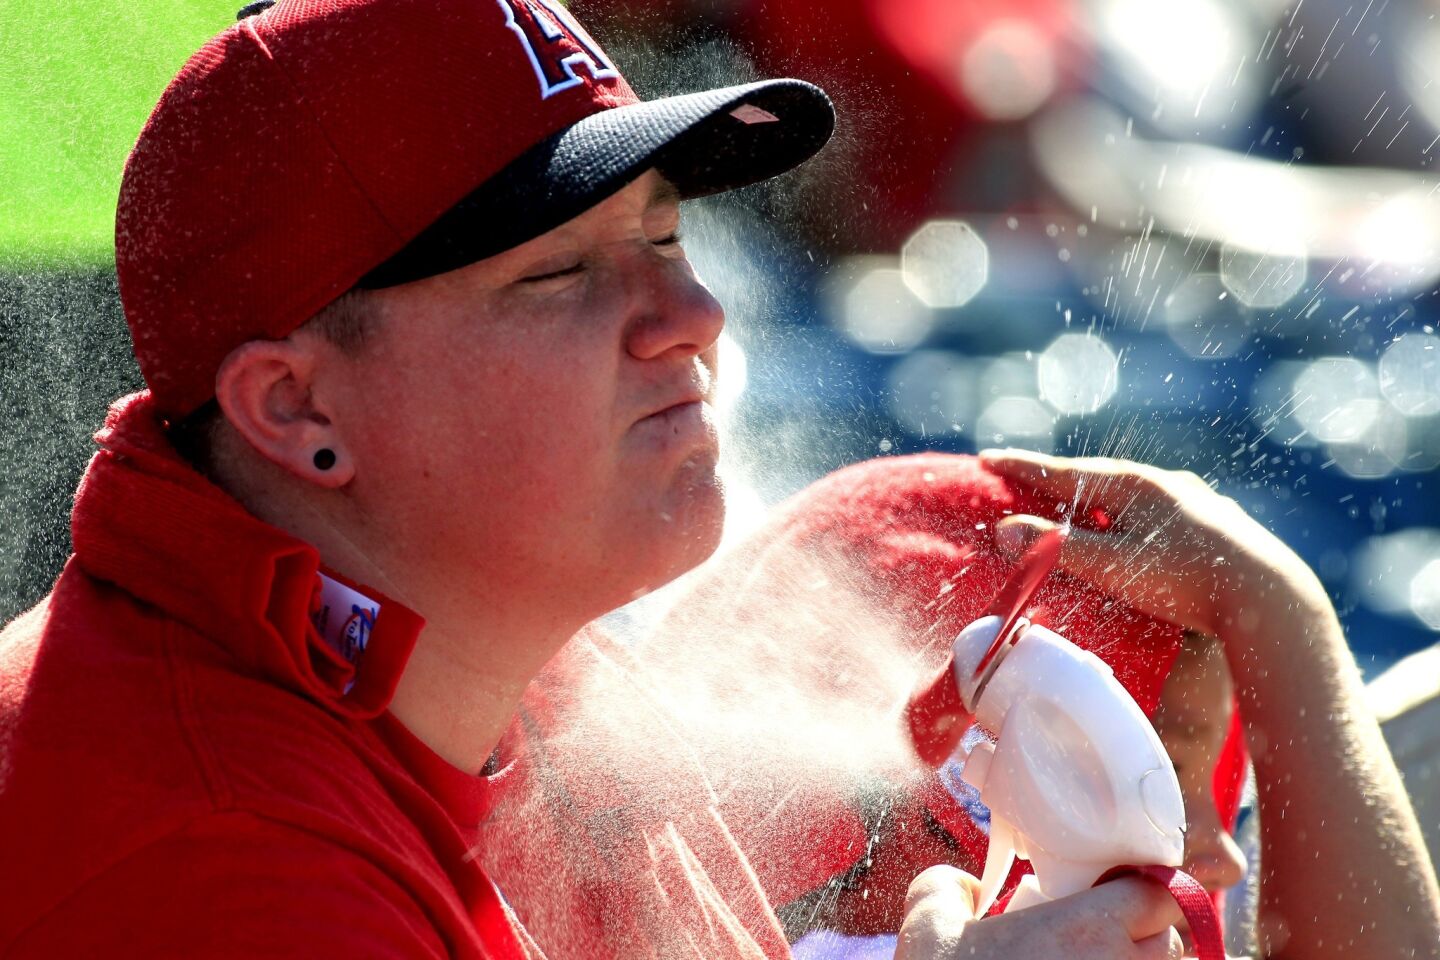 Stacia Watniarski of Riverside cools off while the Angels play the Houston Astros in Anaheim on Sunday.